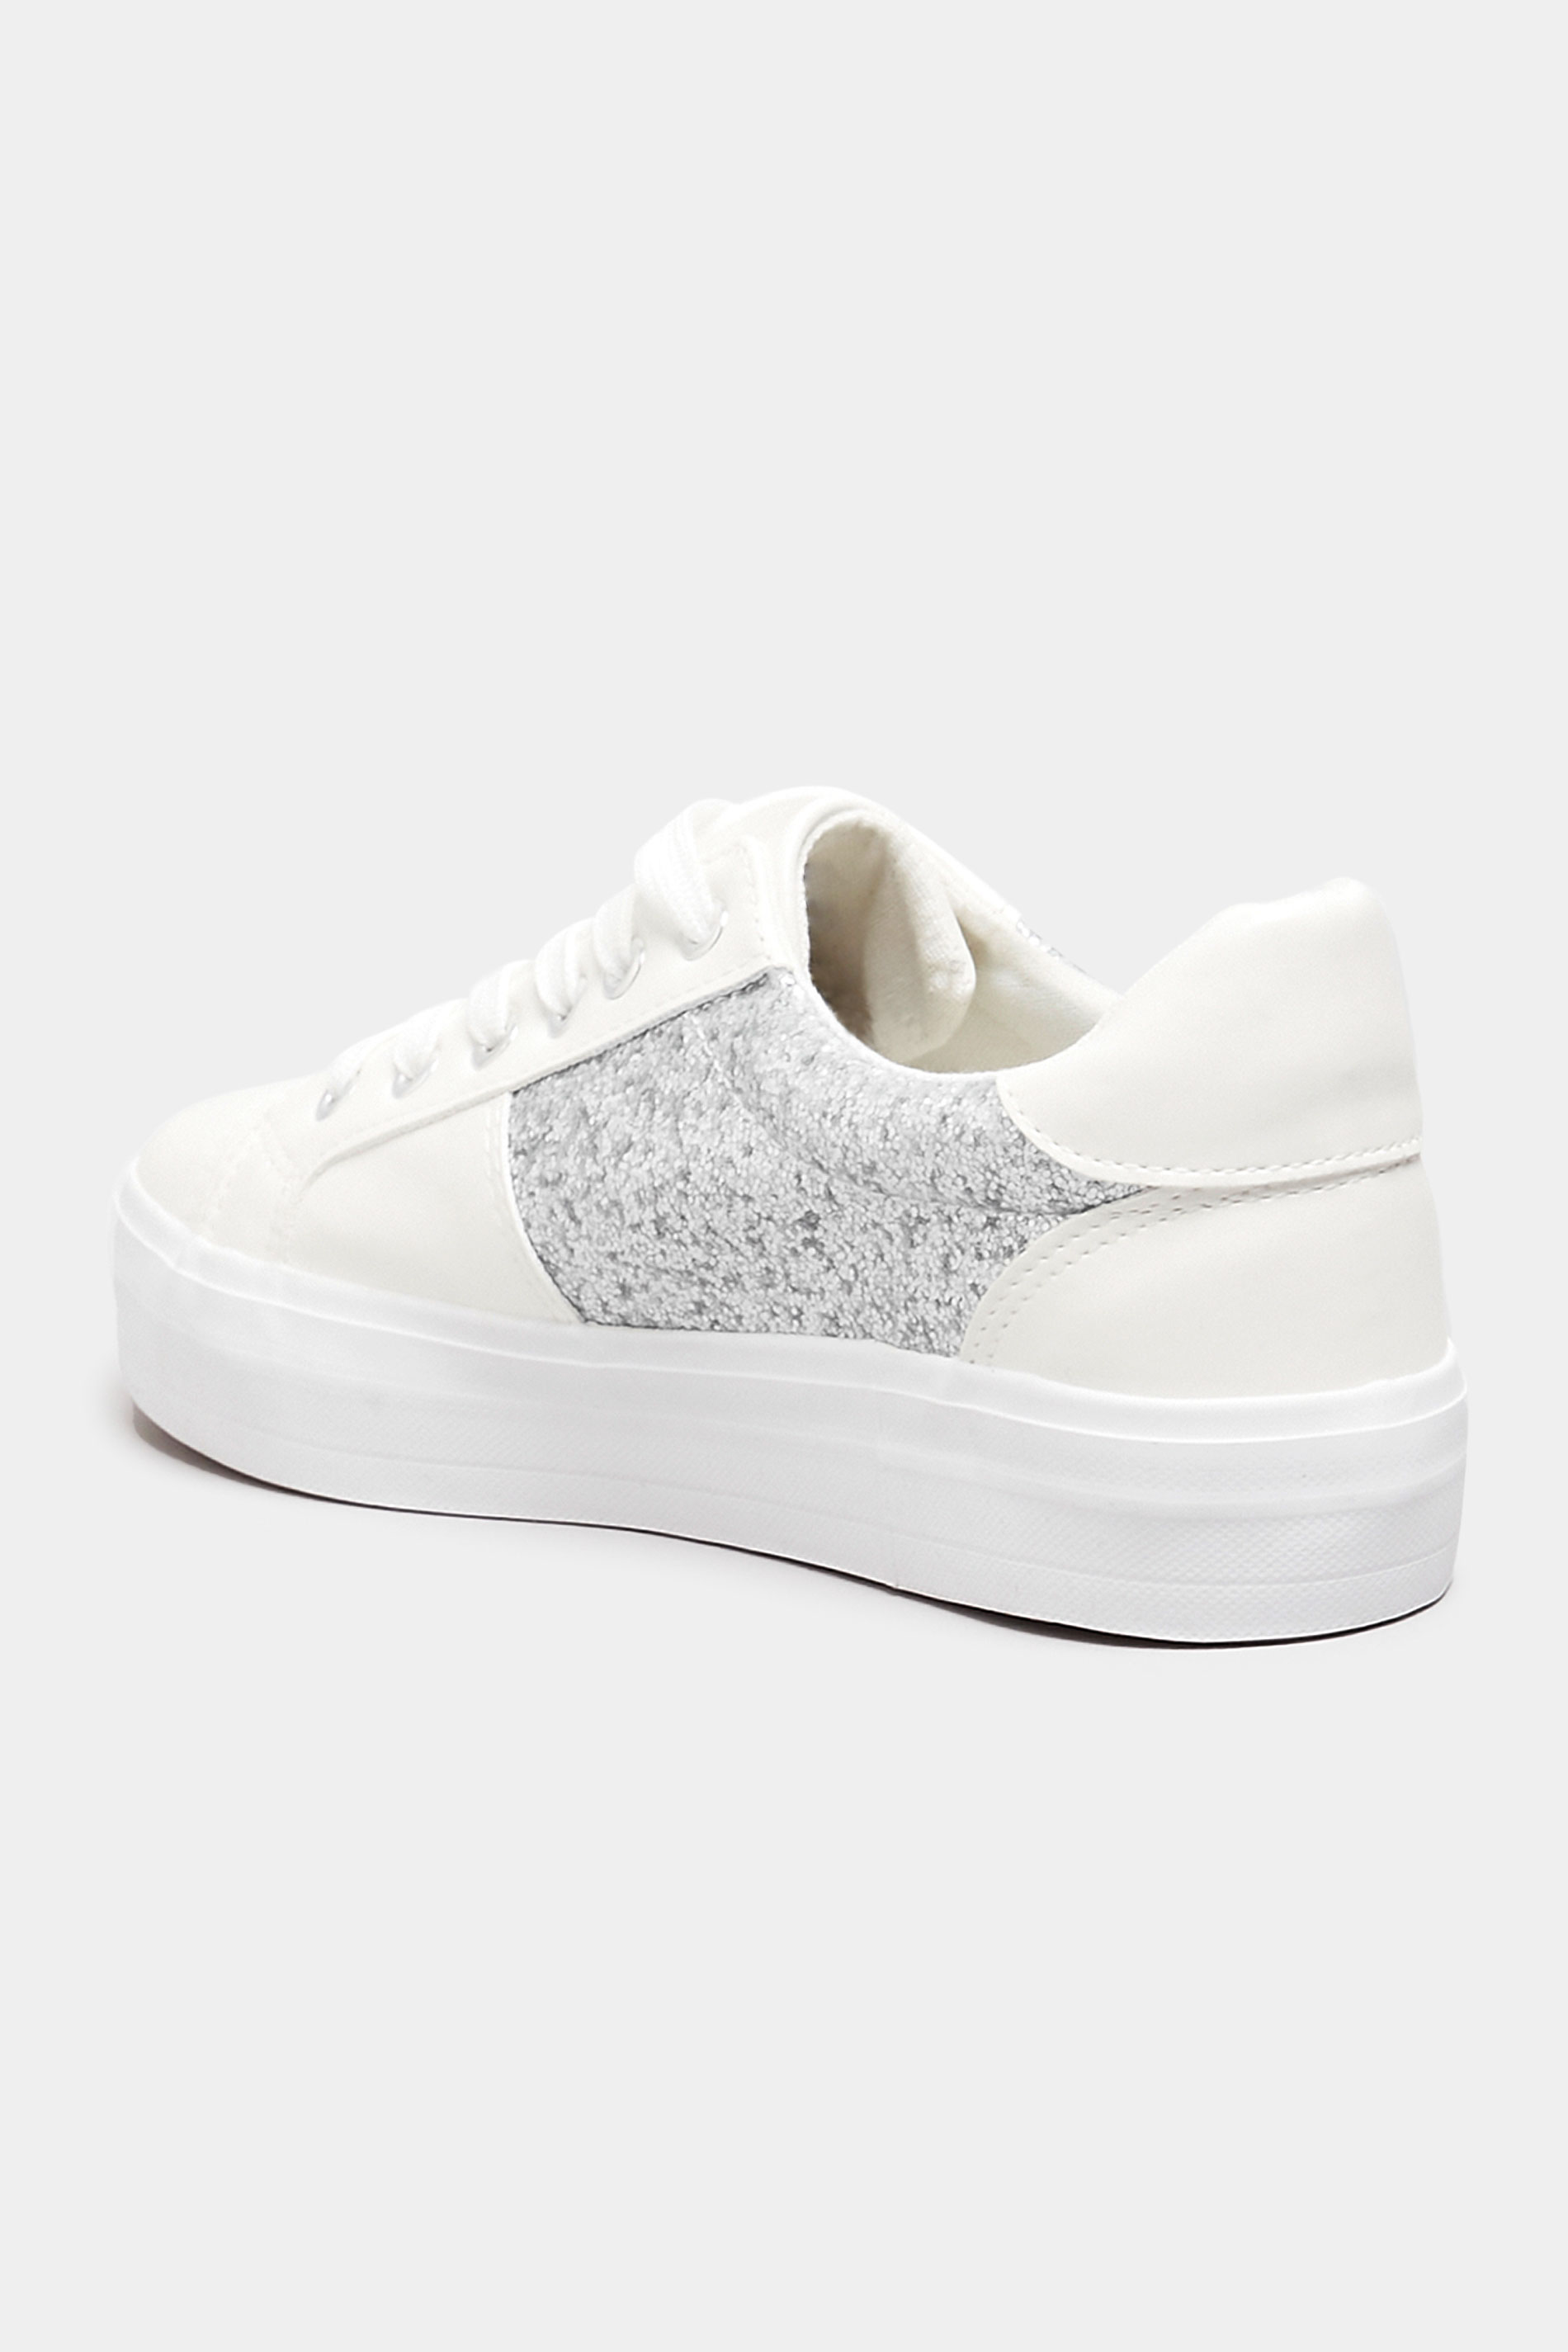 Chaussures Pieds Larges Tennis & Baskets Pieds Larges | Tennis Blanches & Argentées Sequins Pieds Larges EEE - NY88898